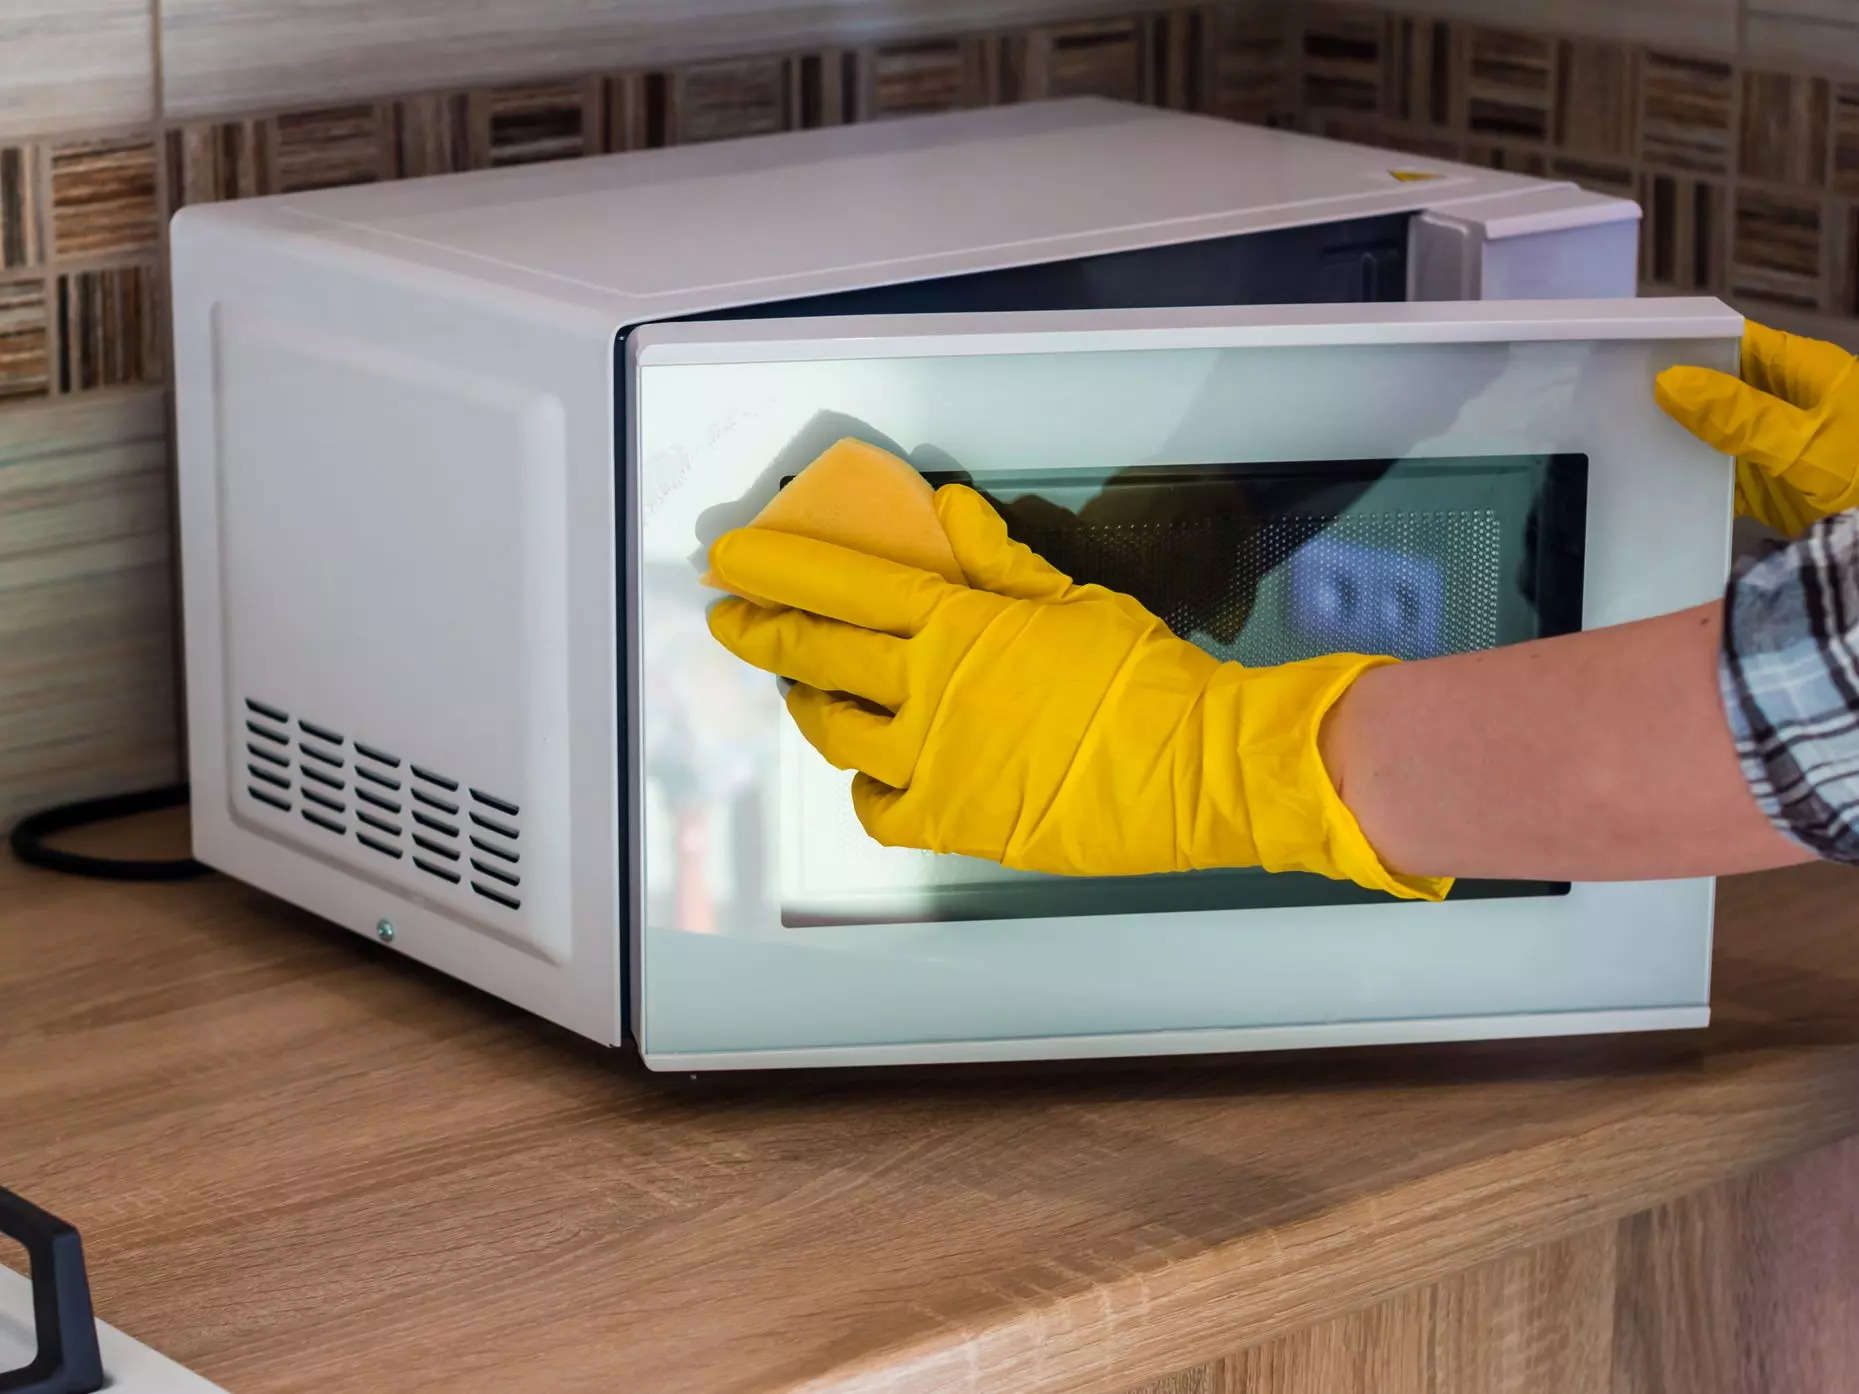 Benefits of Steam Cleaning Your Microwave